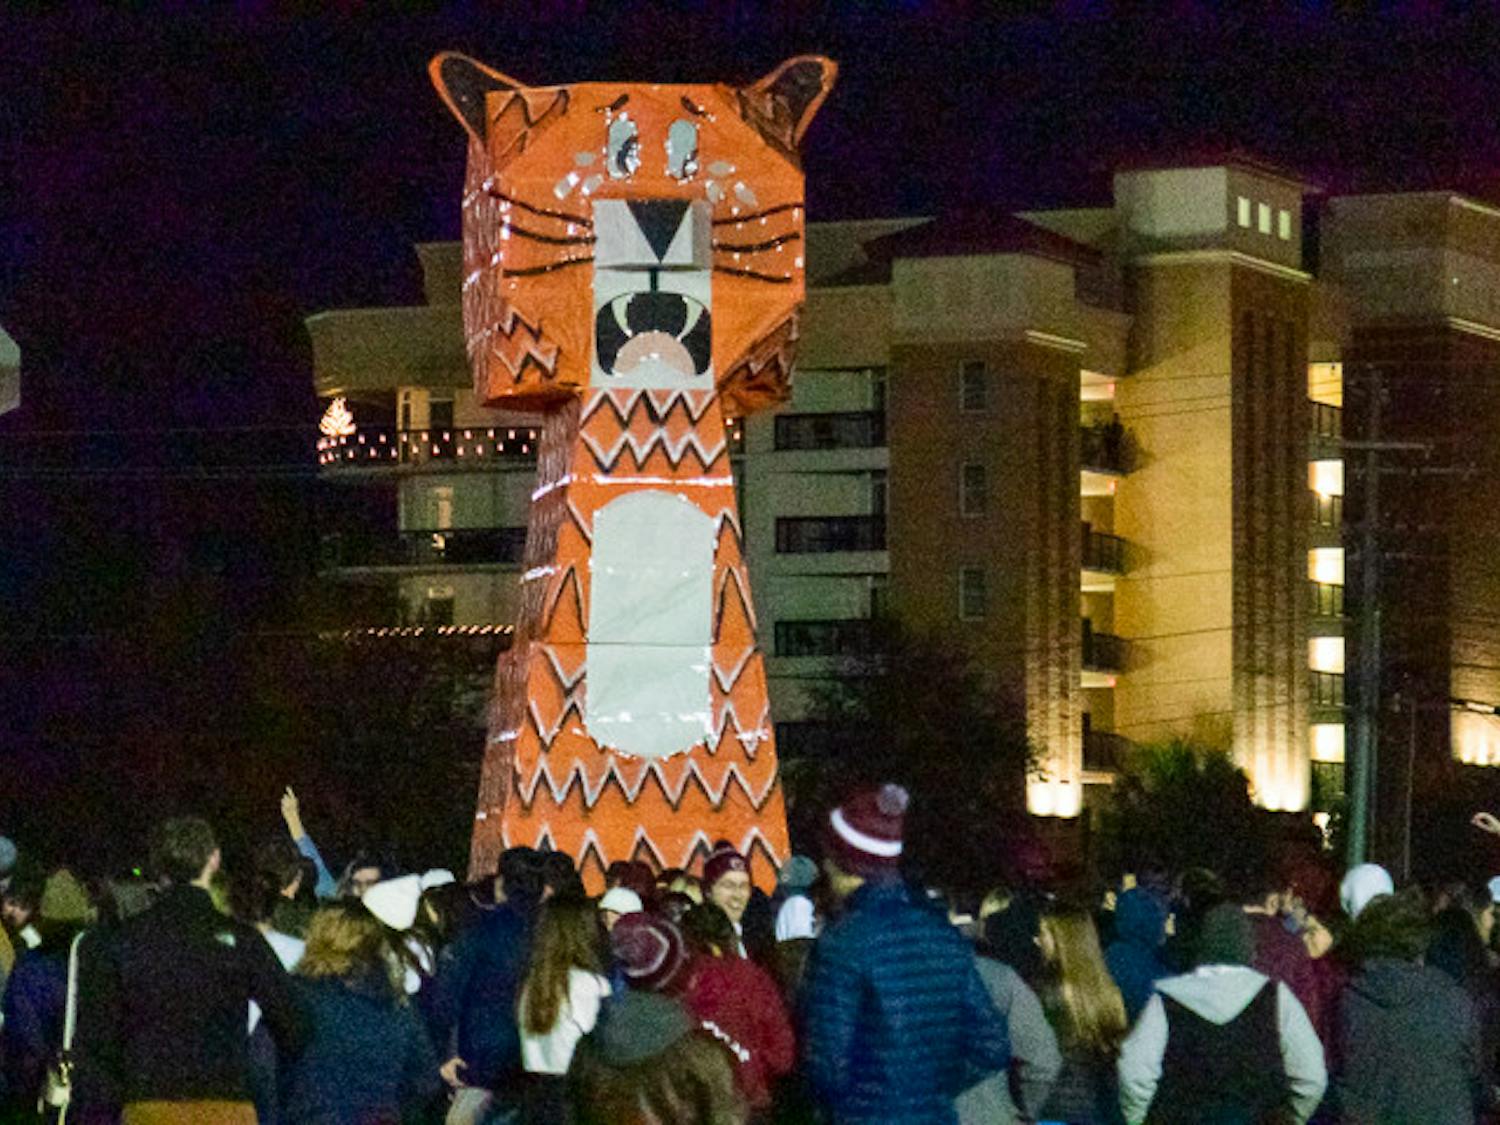 The 30-foot tall, orange and white, Clemson Tiger statue towers over a large crowd of USC students on Nov. 21, 2022. The tiger was constructed in the middle of the Bluff Road Intermural field by the USC American Society of Mechanical Engineers and Society of Hispanic Professional Engineers constructed the effigy for this year's event.